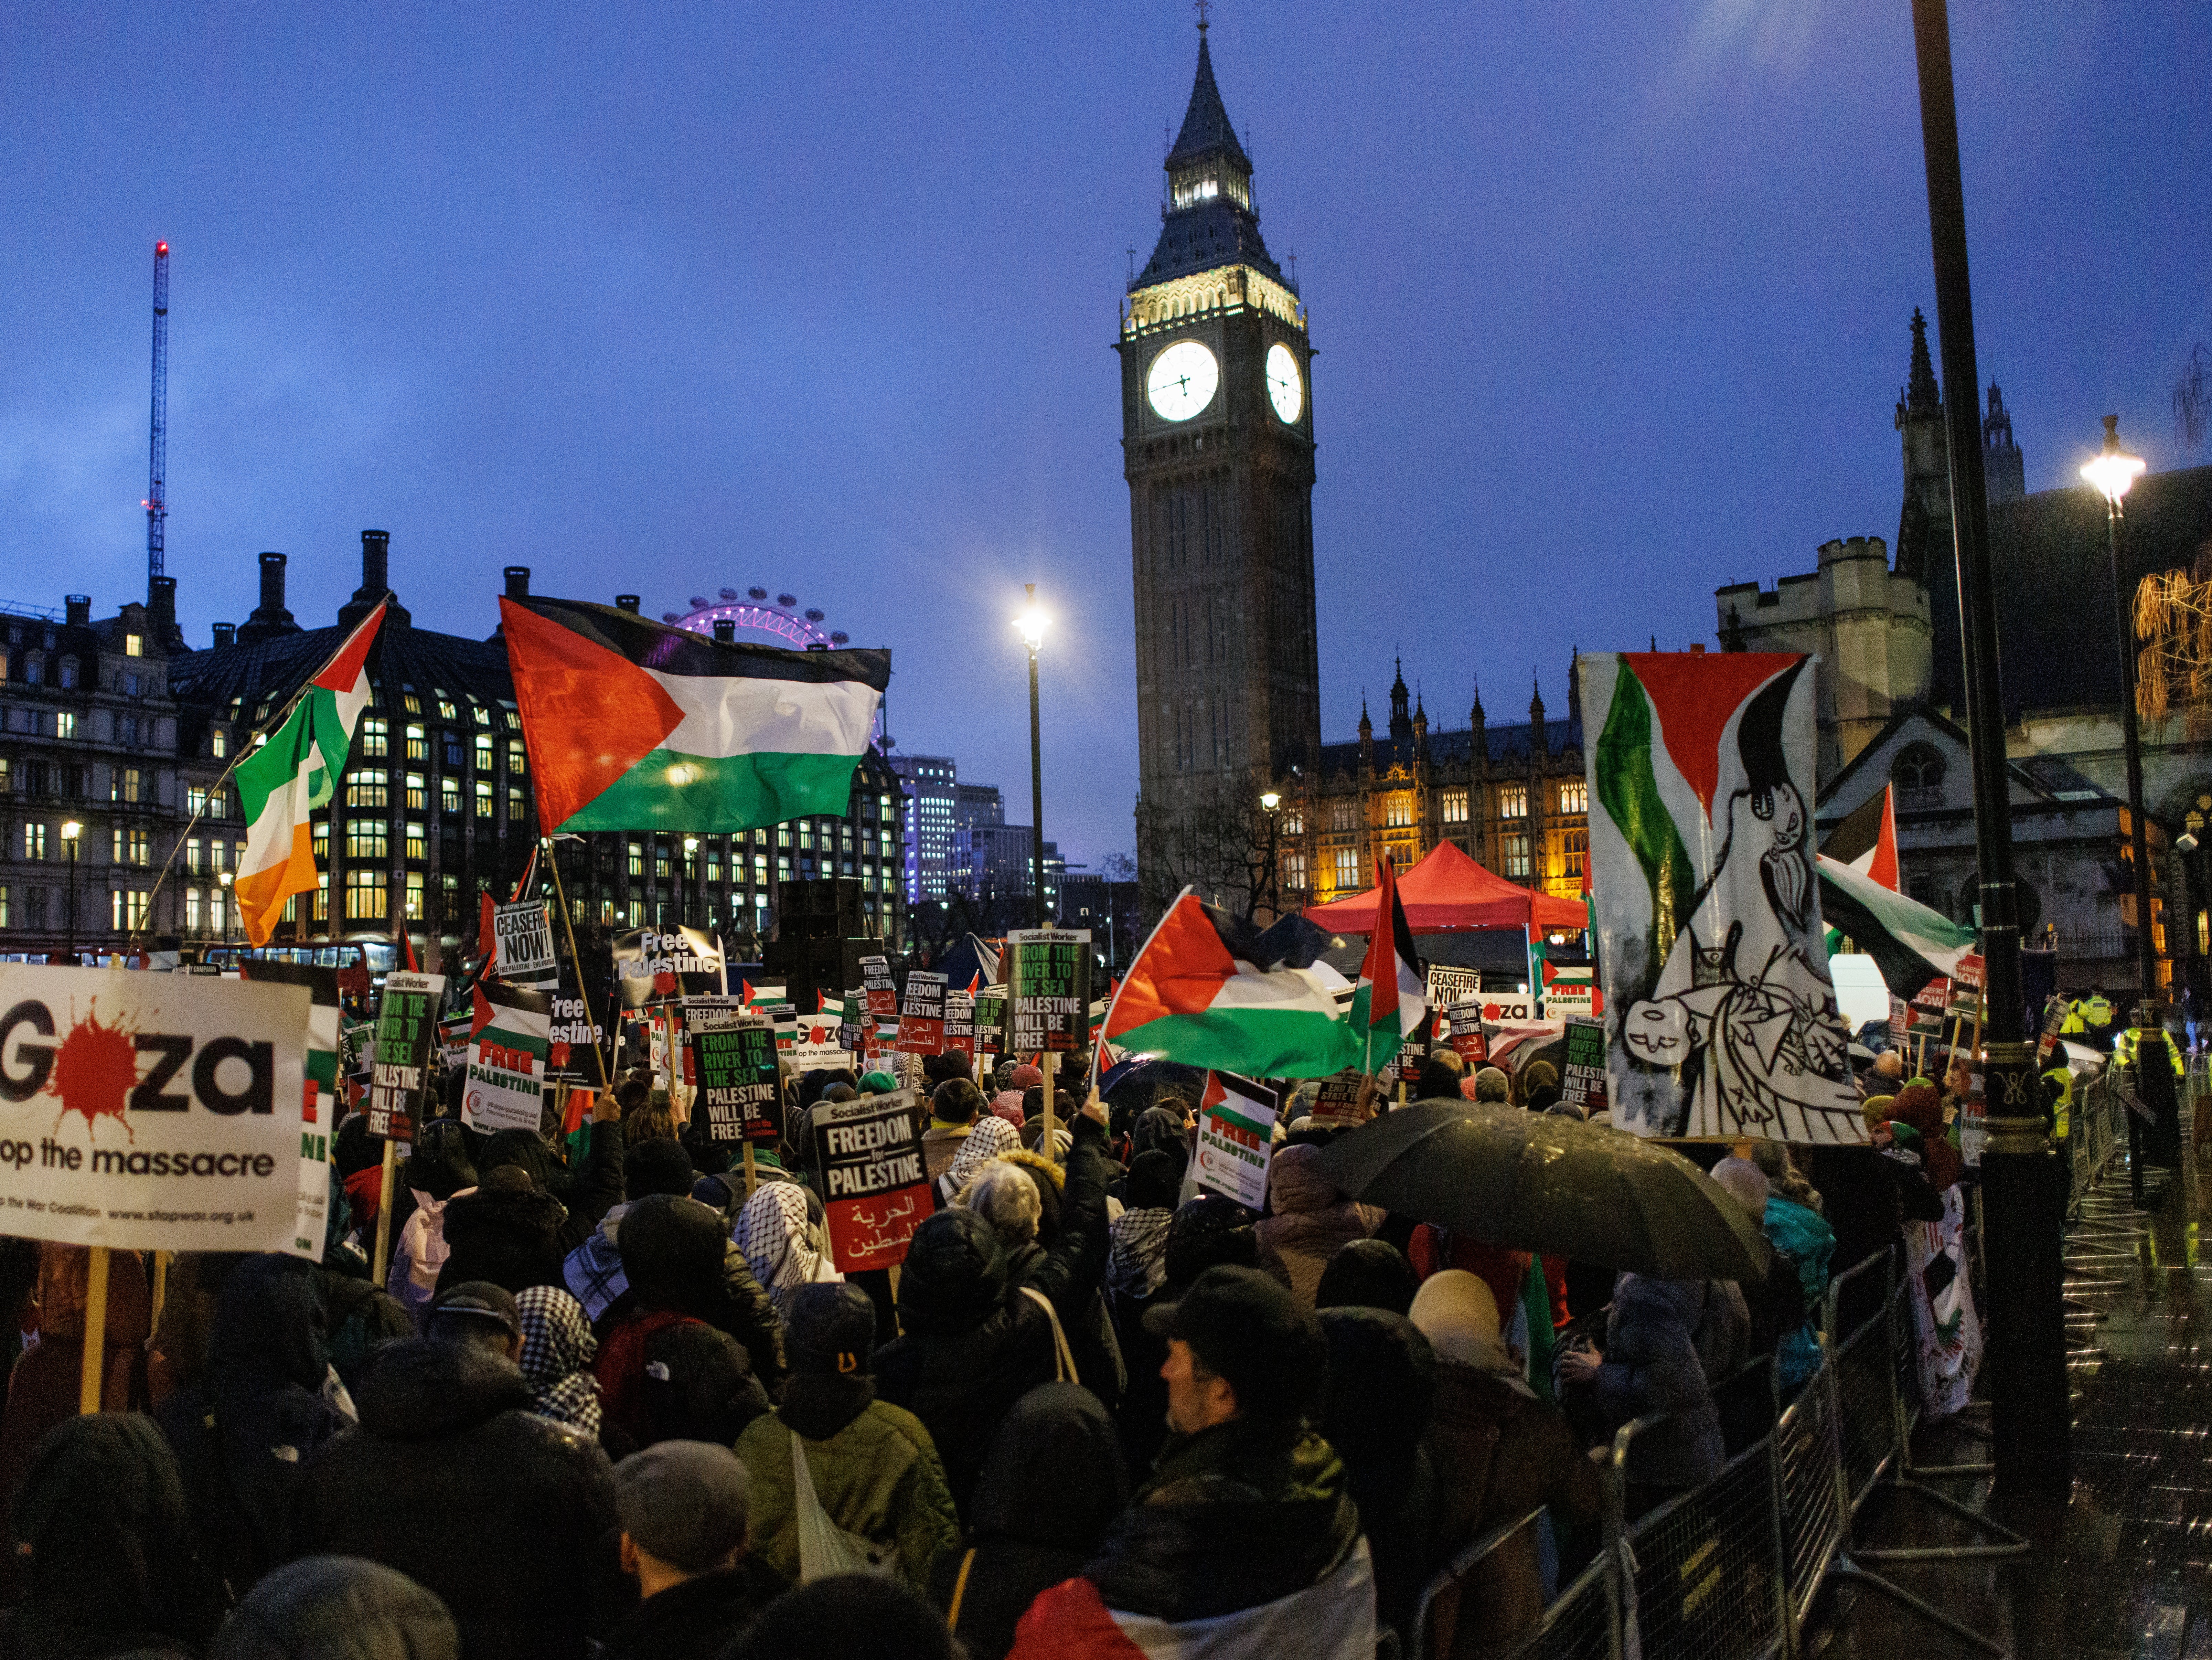 Protestors demonstrated outside of parliament on Wednesday evening